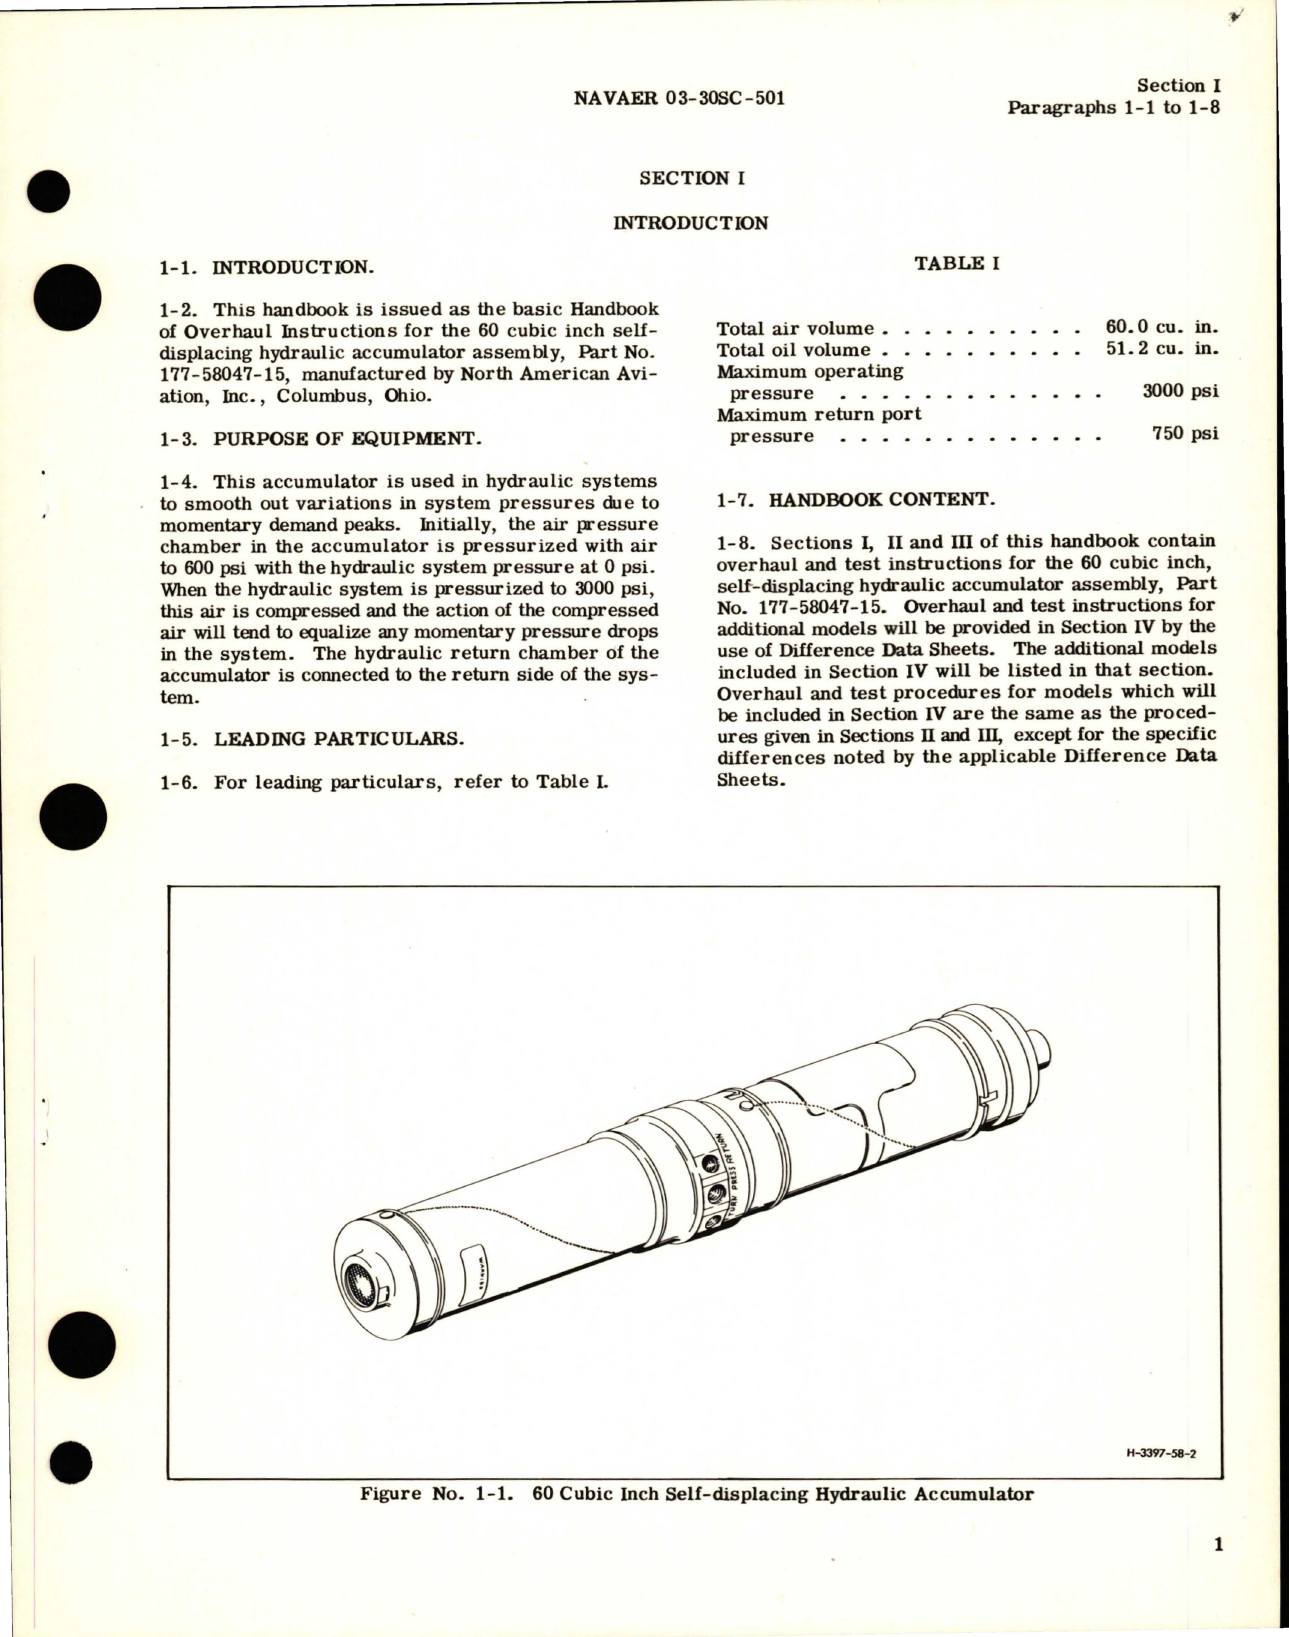 Sample page 5 from AirCorps Library document: Overhaul Instructions for 60 Cubic Inch Self-Displacing Hydraulic Accumulator Assembly - Part 177-58047-15 